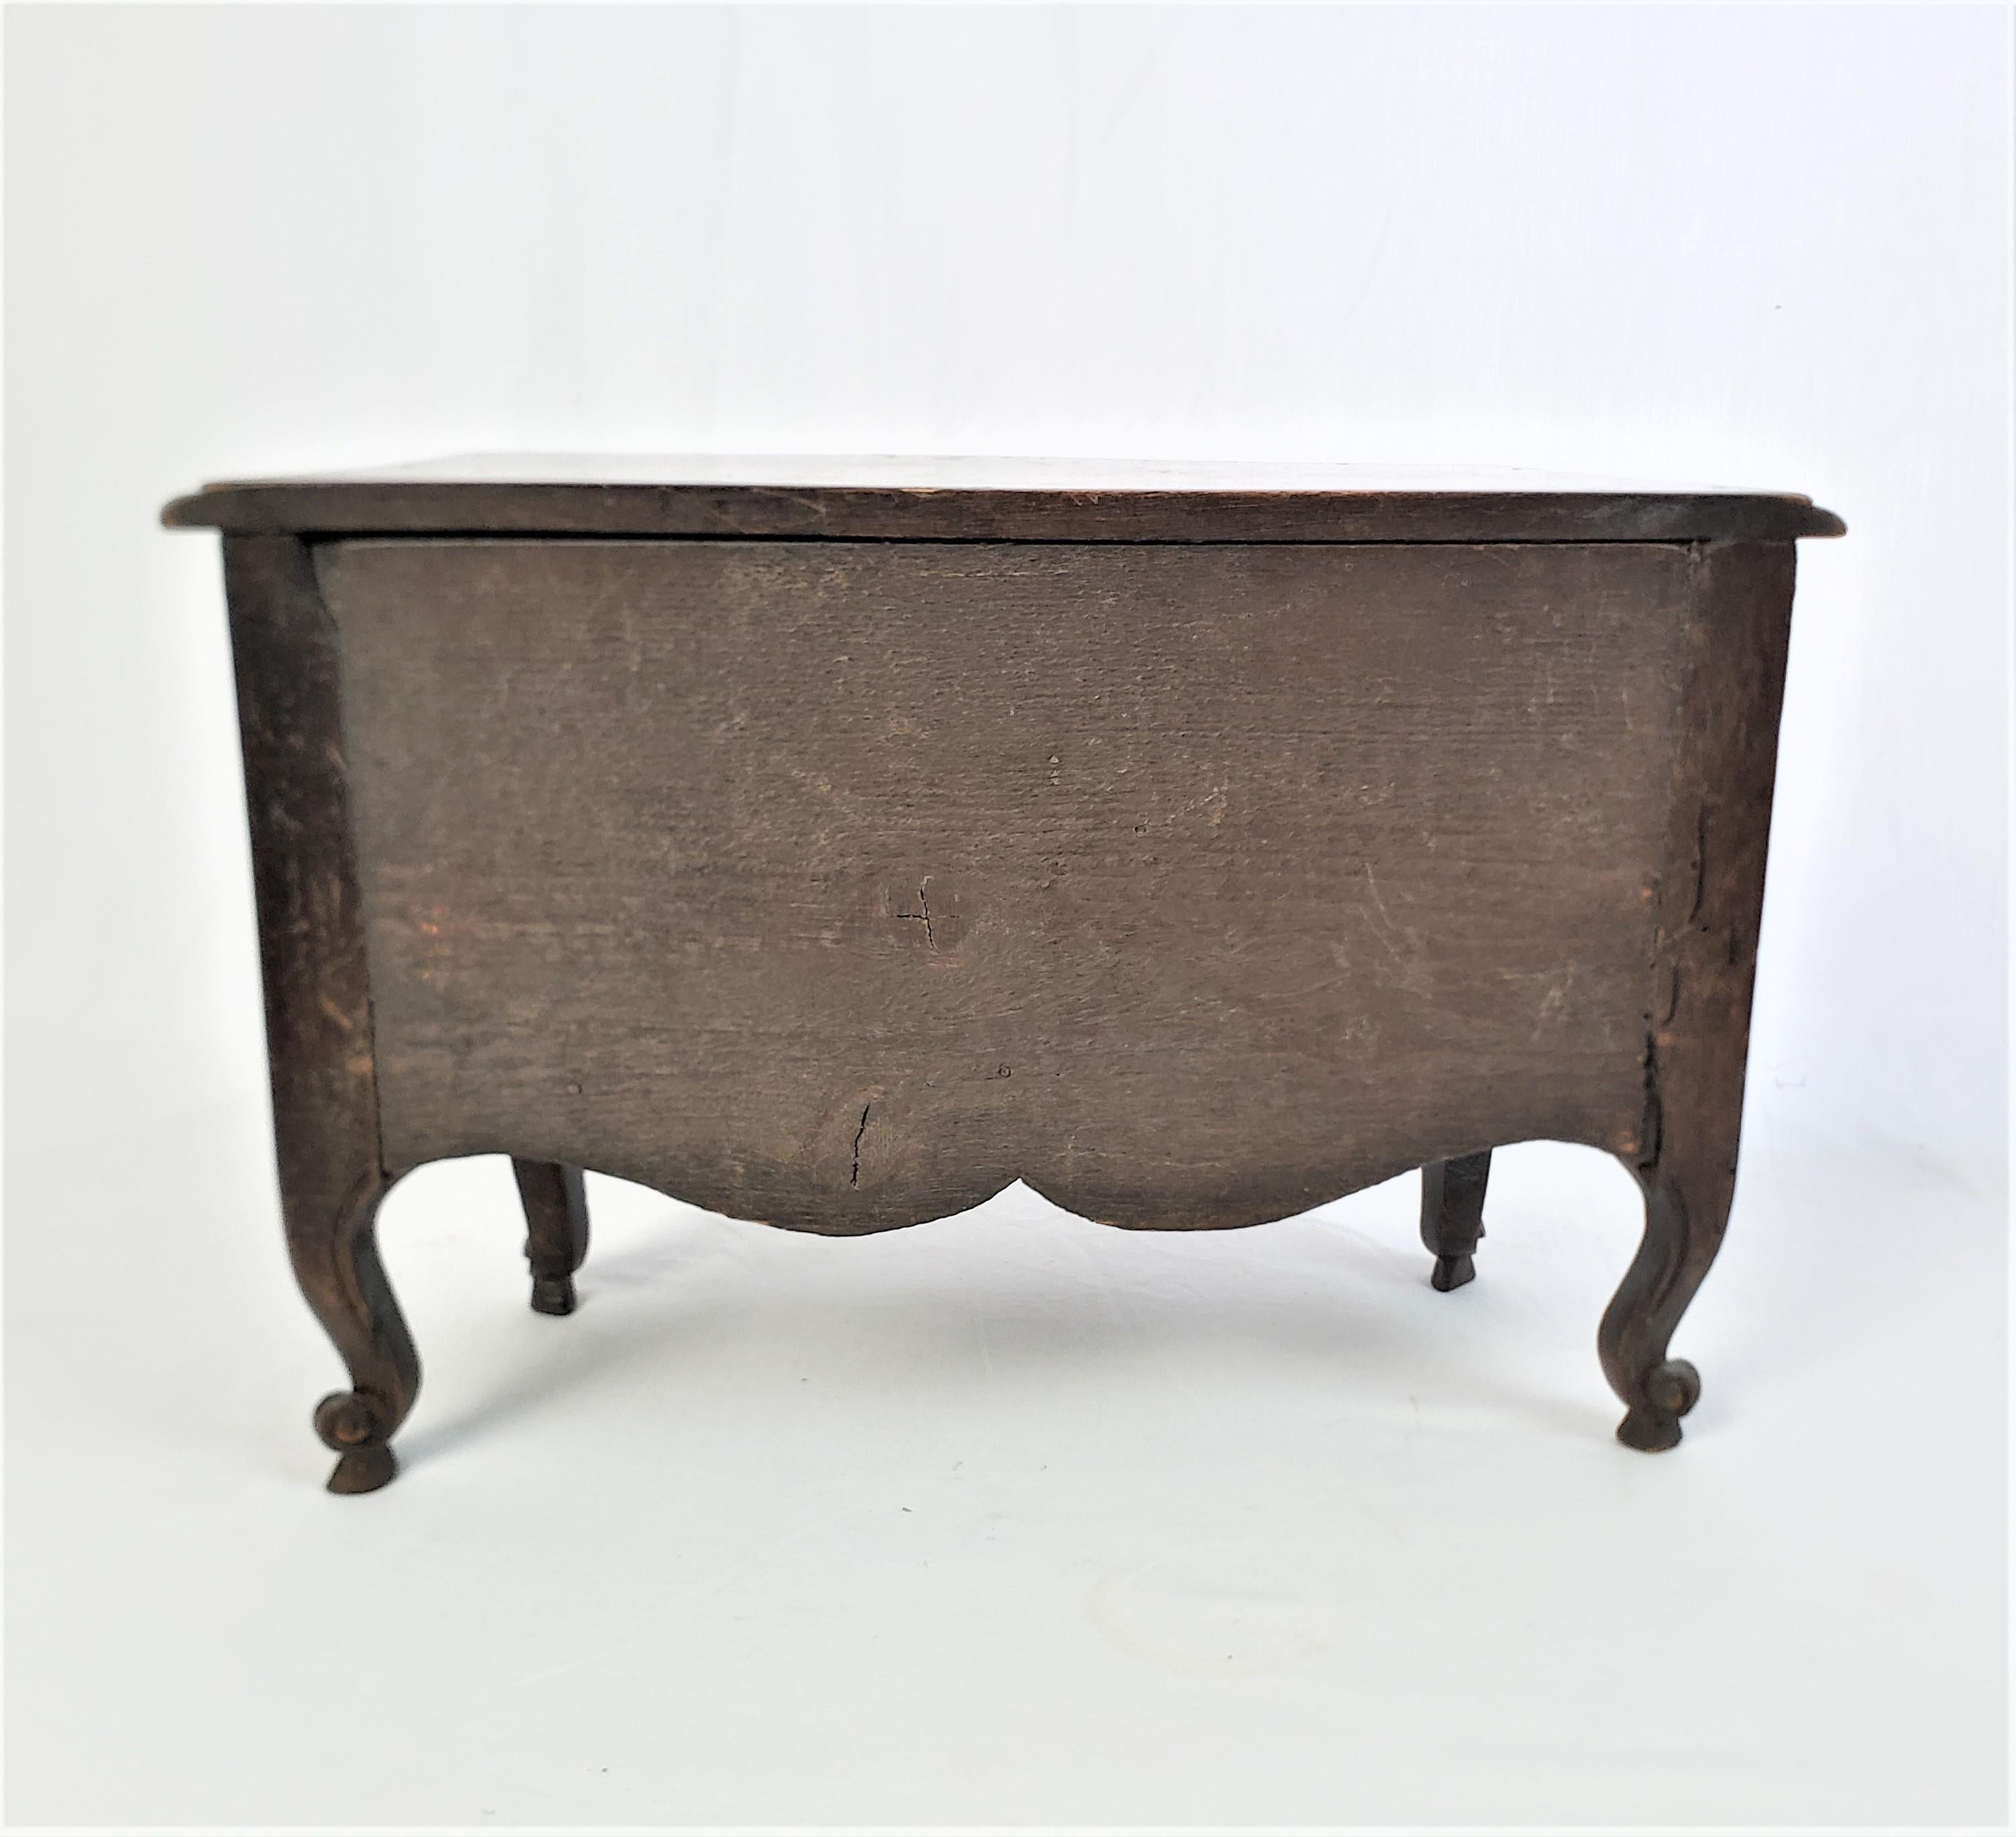 Antique French Louis XV Styled Miniature Two Drawer Dresser or Jewelry Chest In Good Condition For Sale In Hamilton, Ontario